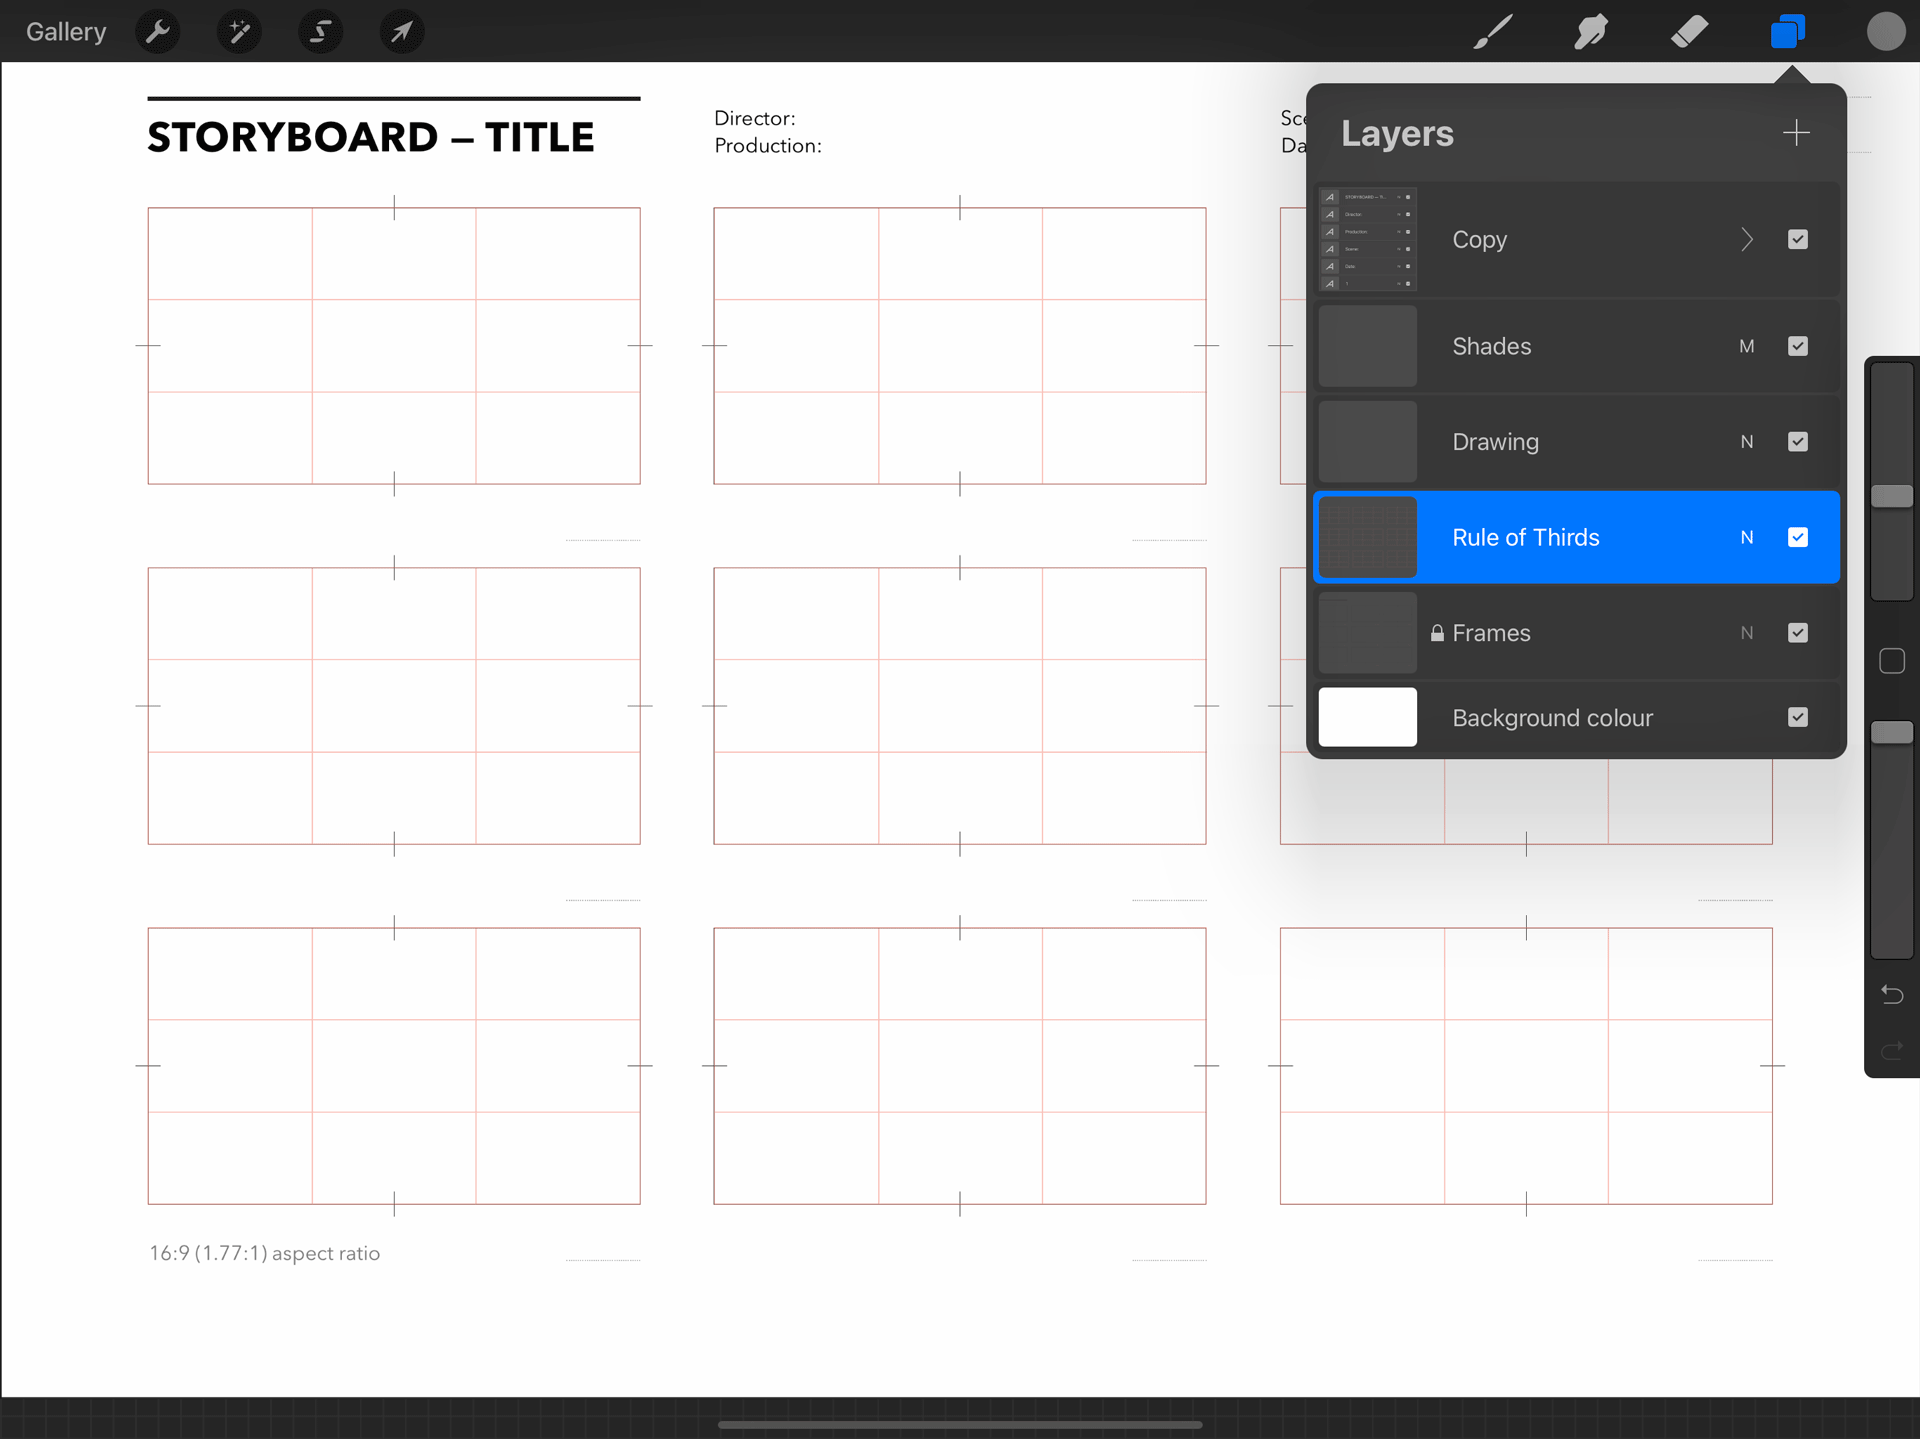 Free Procreate storyboard template, 9 frames for 16:9 (1.77:1) films